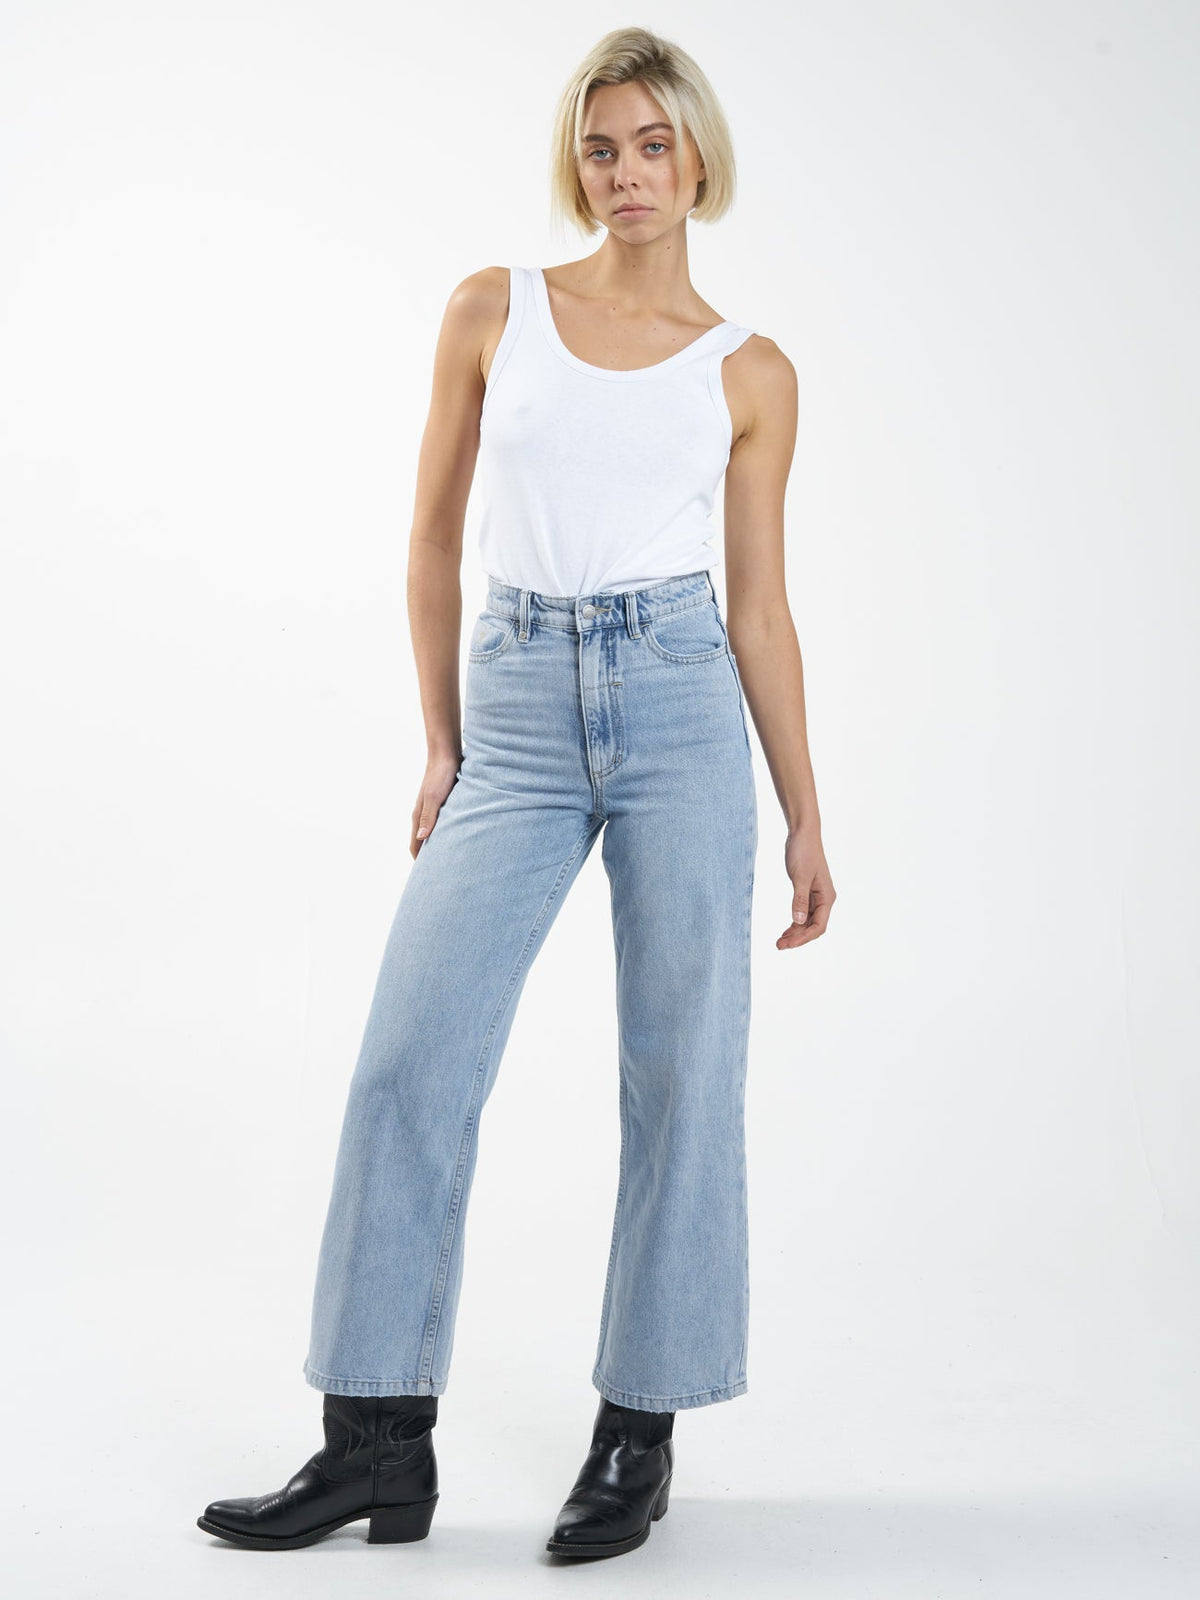 The Holly Jean is a super flattering, easy wear with a high waist, and wide legs. A basic staple for any wardrobe! Made with 100% Organic Cotton and design in Byron Bay, Australia.